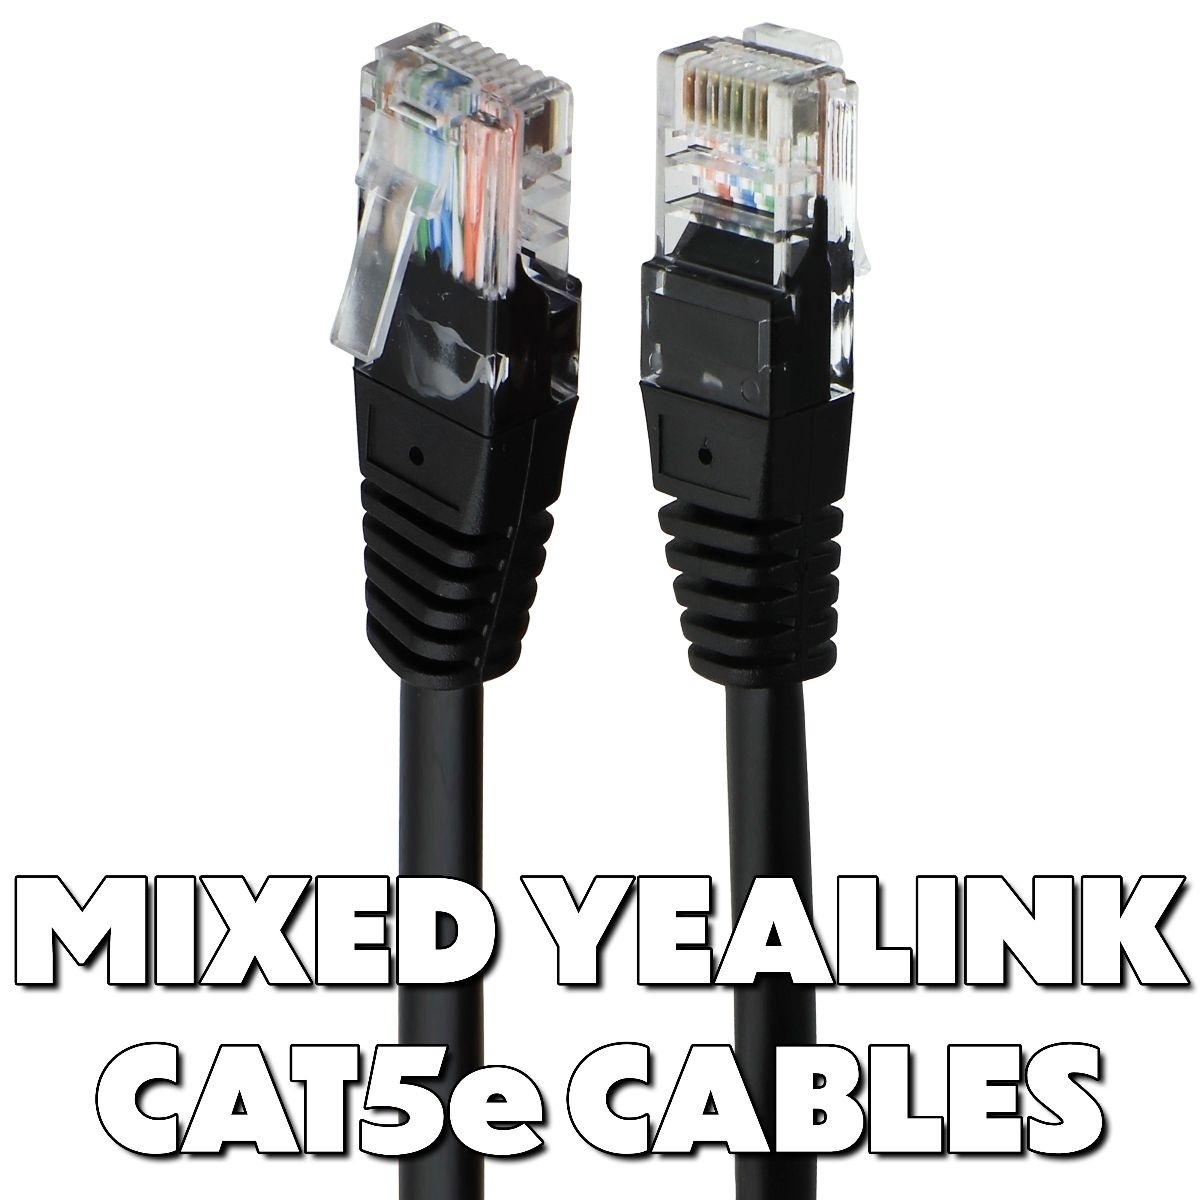 MIXED Yealink (3.3FT/1M) Cat5e Ethernet Cables - Black (E348815)